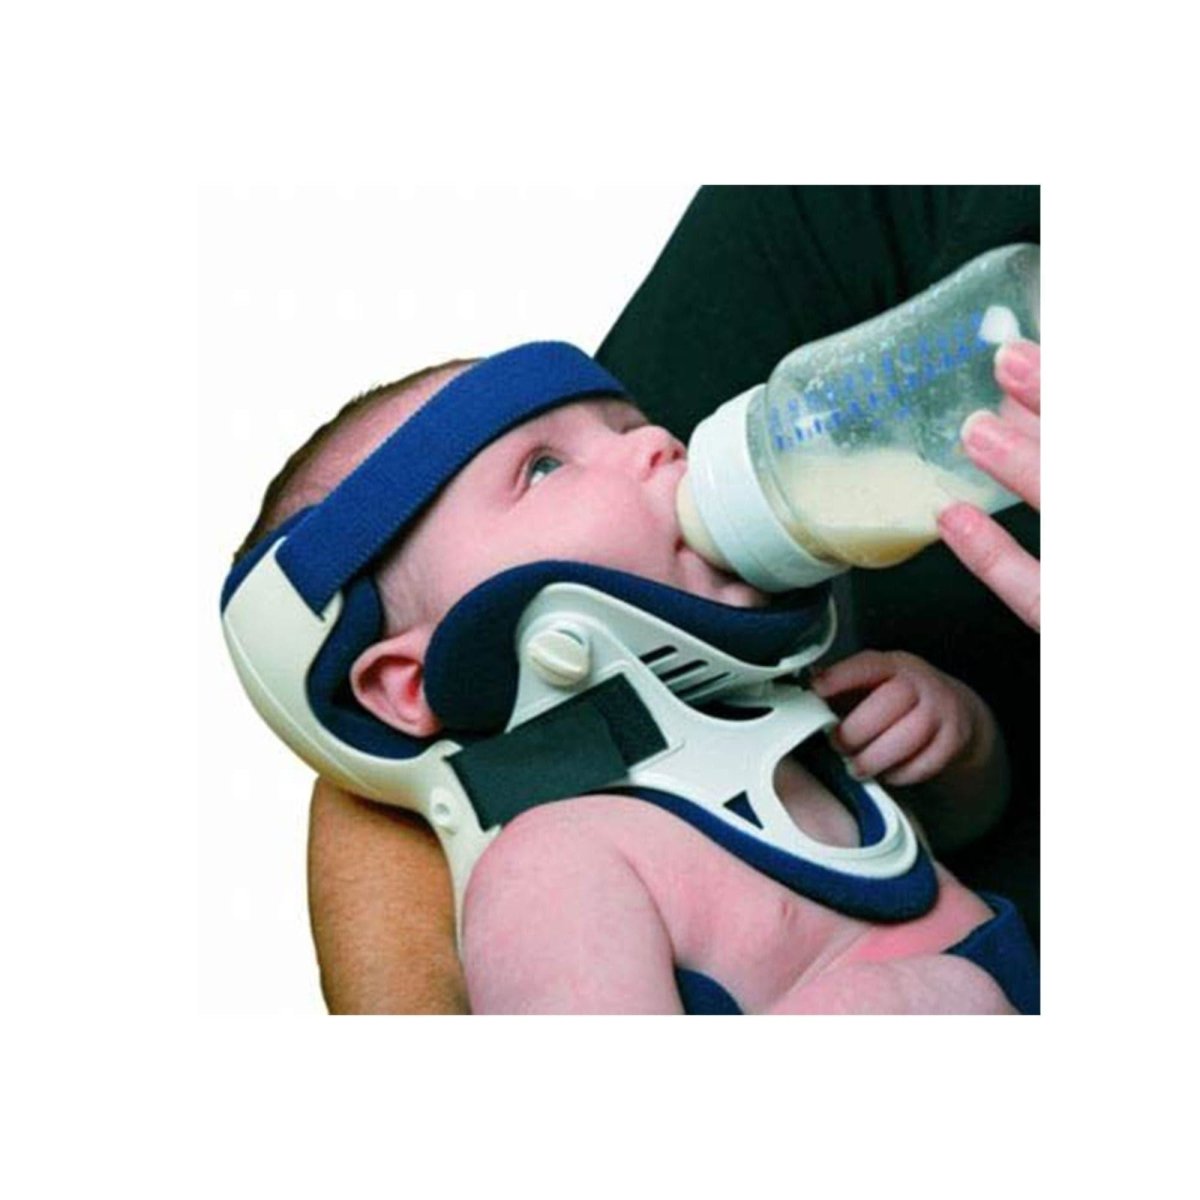 Ossur Papoose Infant Immobilizer Collar - PO-100-Papoose - Brace Direct